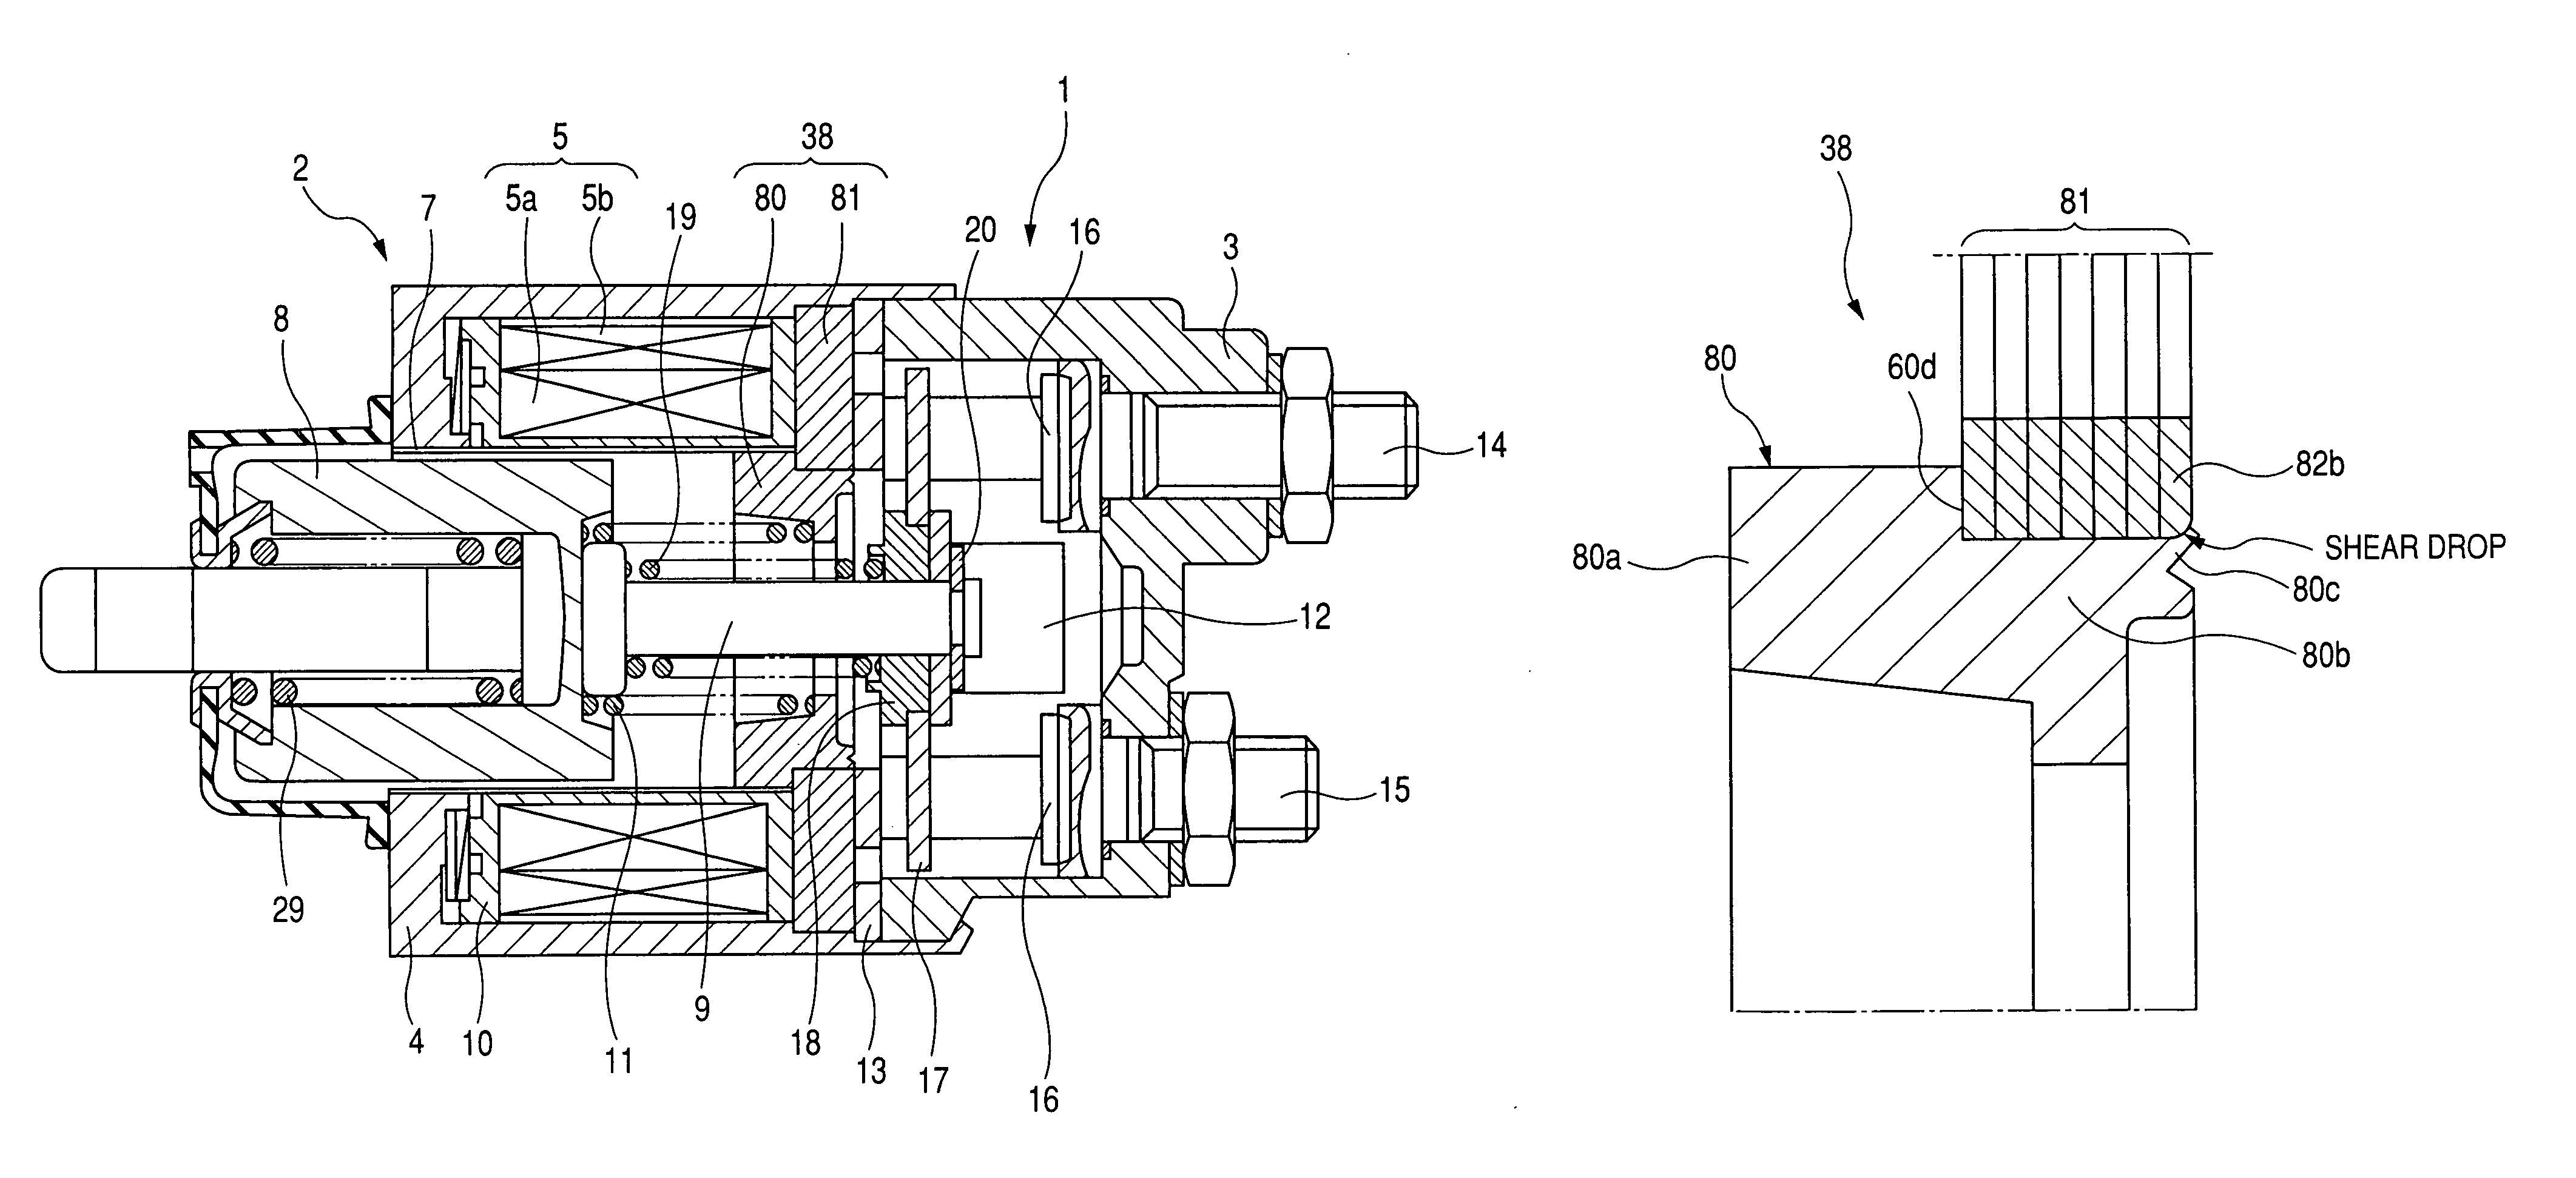 Magnet switch with magnetic core designed to ensure stability in operation thereof